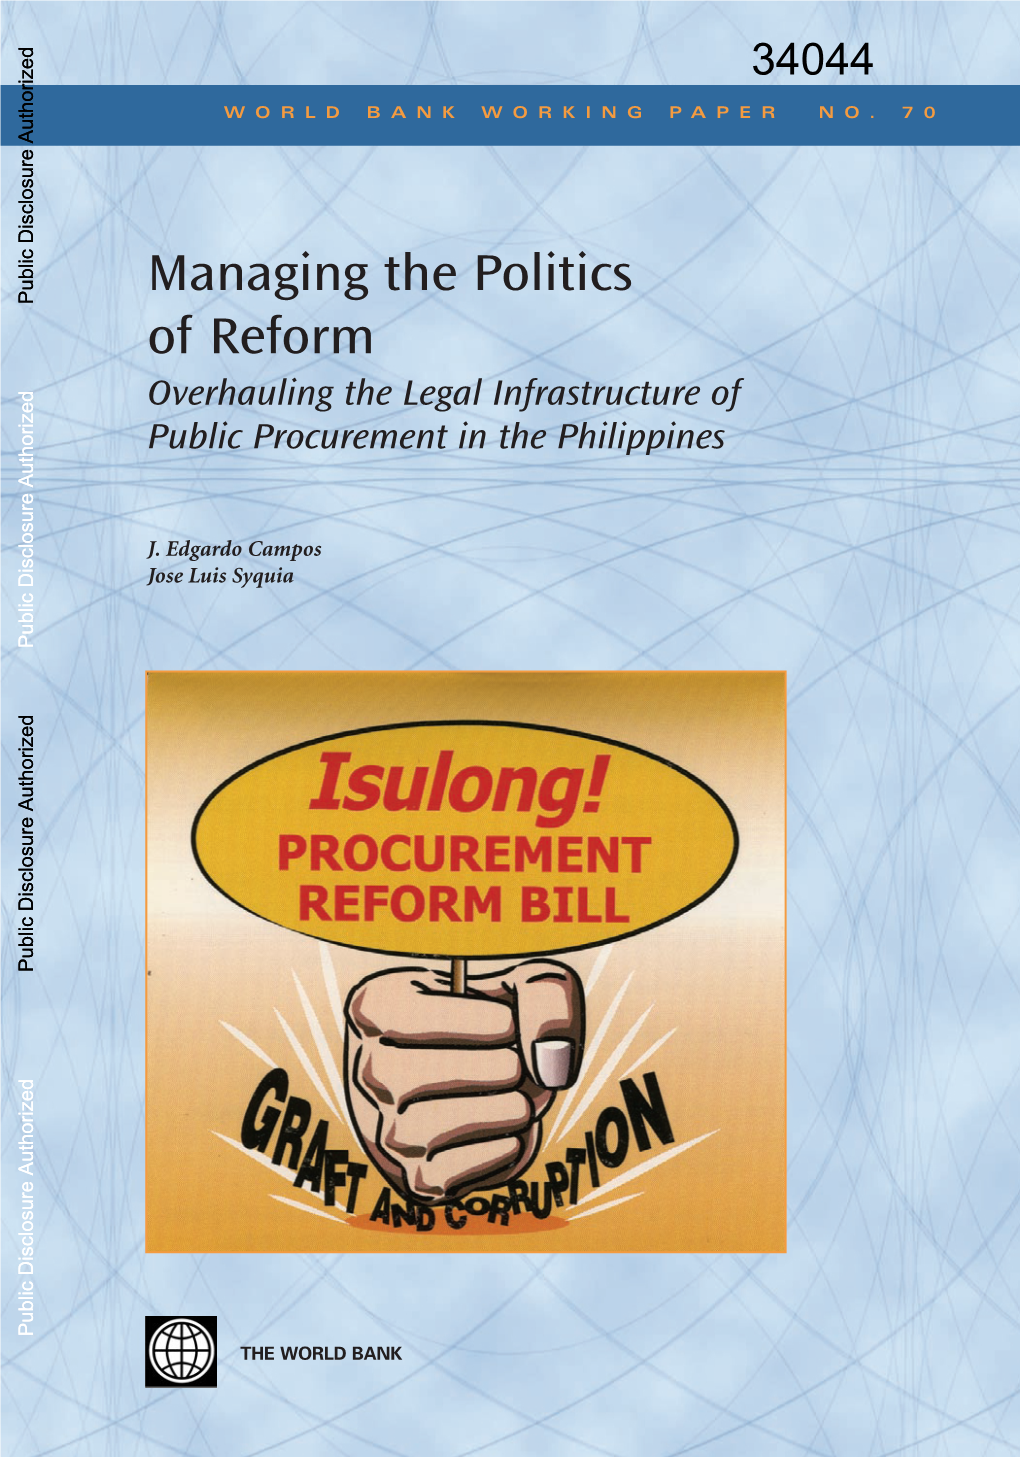 Overhauling the Legal Infrastructure of Public Procurement in the Philippines